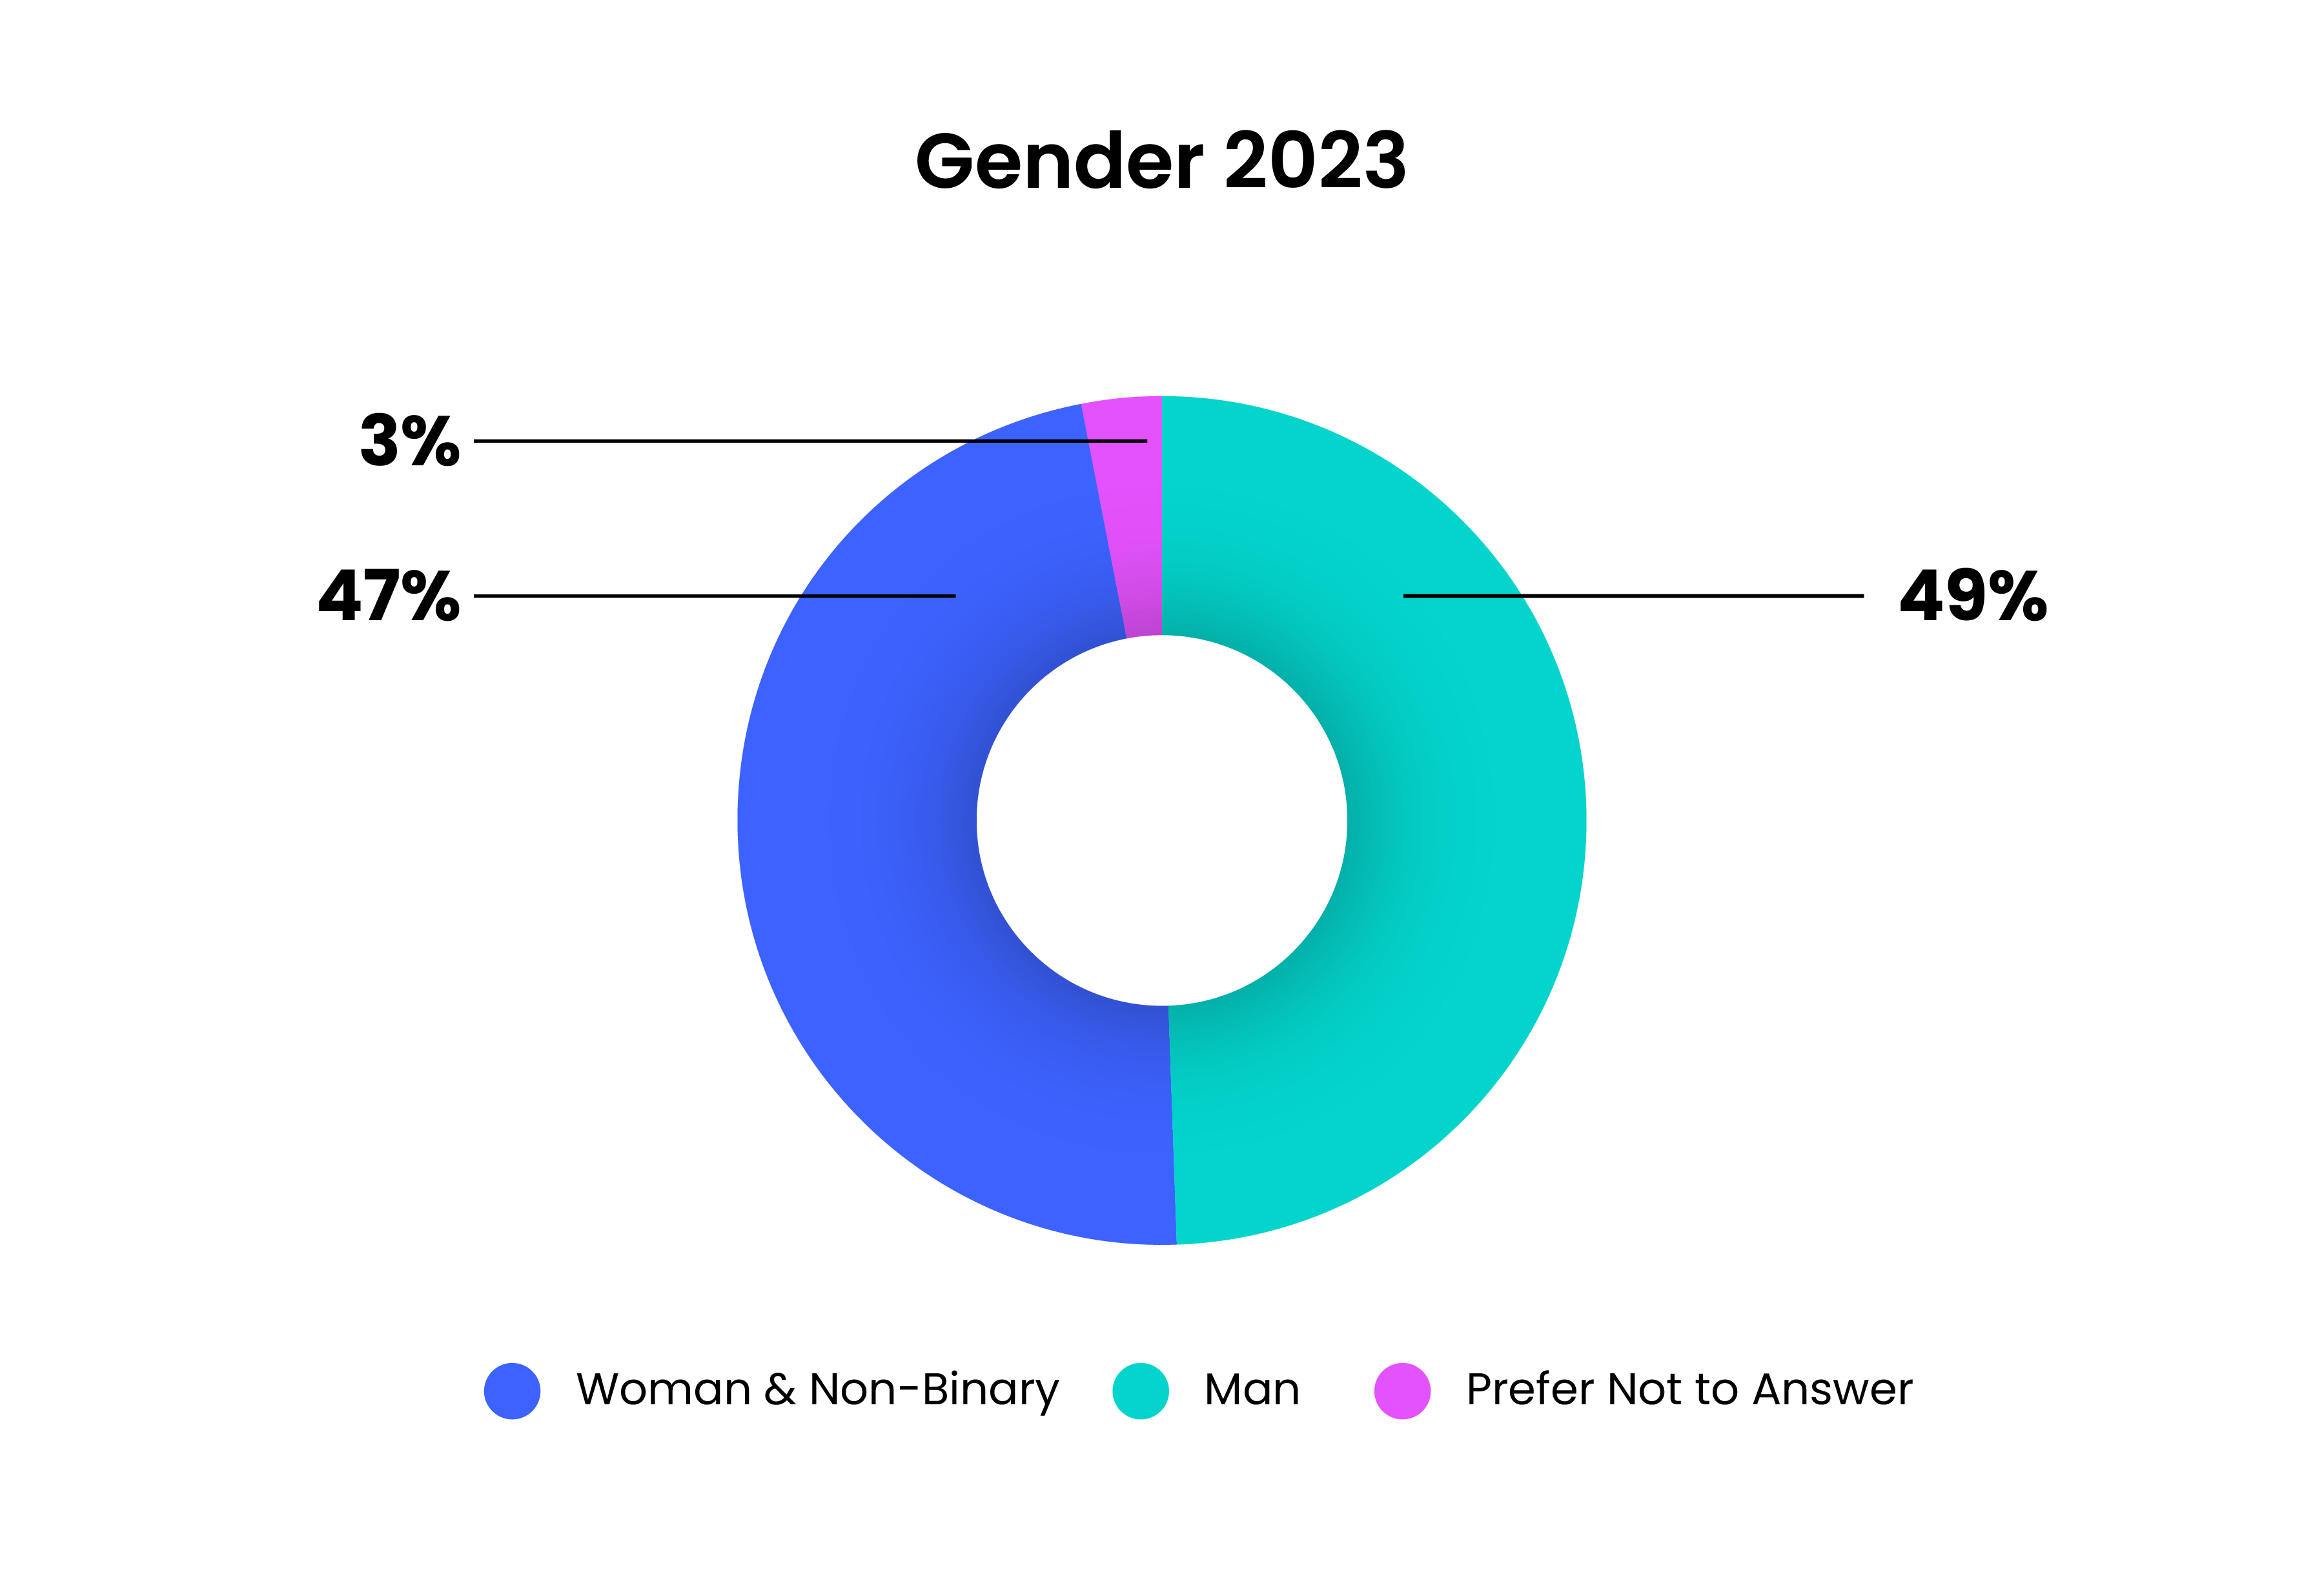 Gender 2023: 47% Woman and Non-binary, 49% Man, 3% Prefer not to Answer